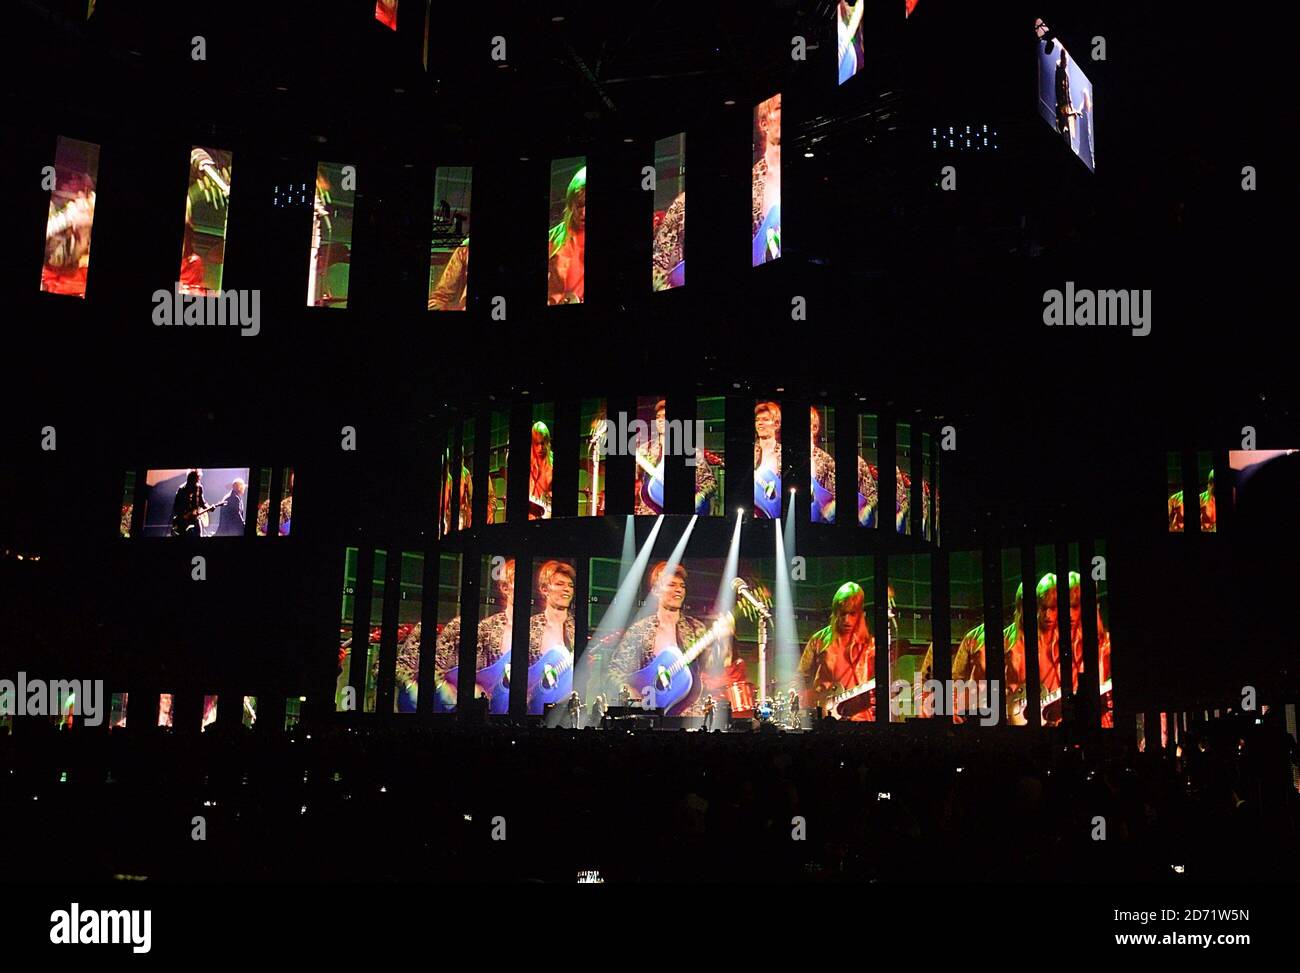 David Bowie tribute on stage during the 2016 Brit Awards at the O2 Arena, London. Stock Photo